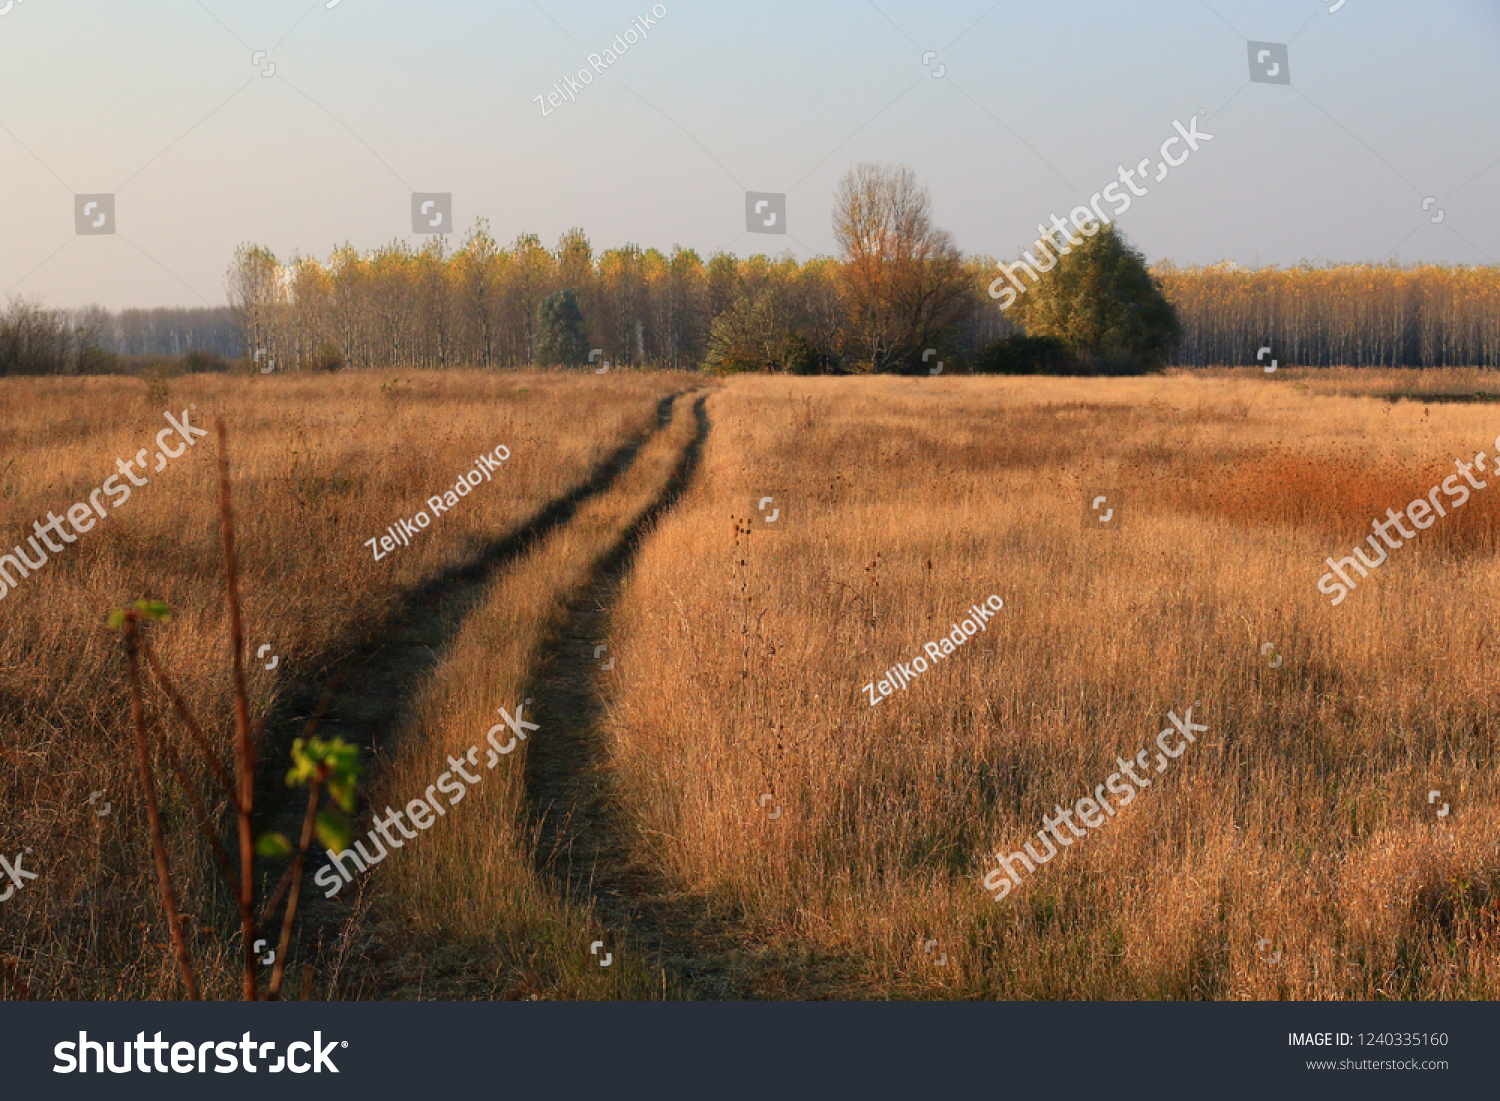 Beautiful Fall scene on curved unpaved road #1240335160